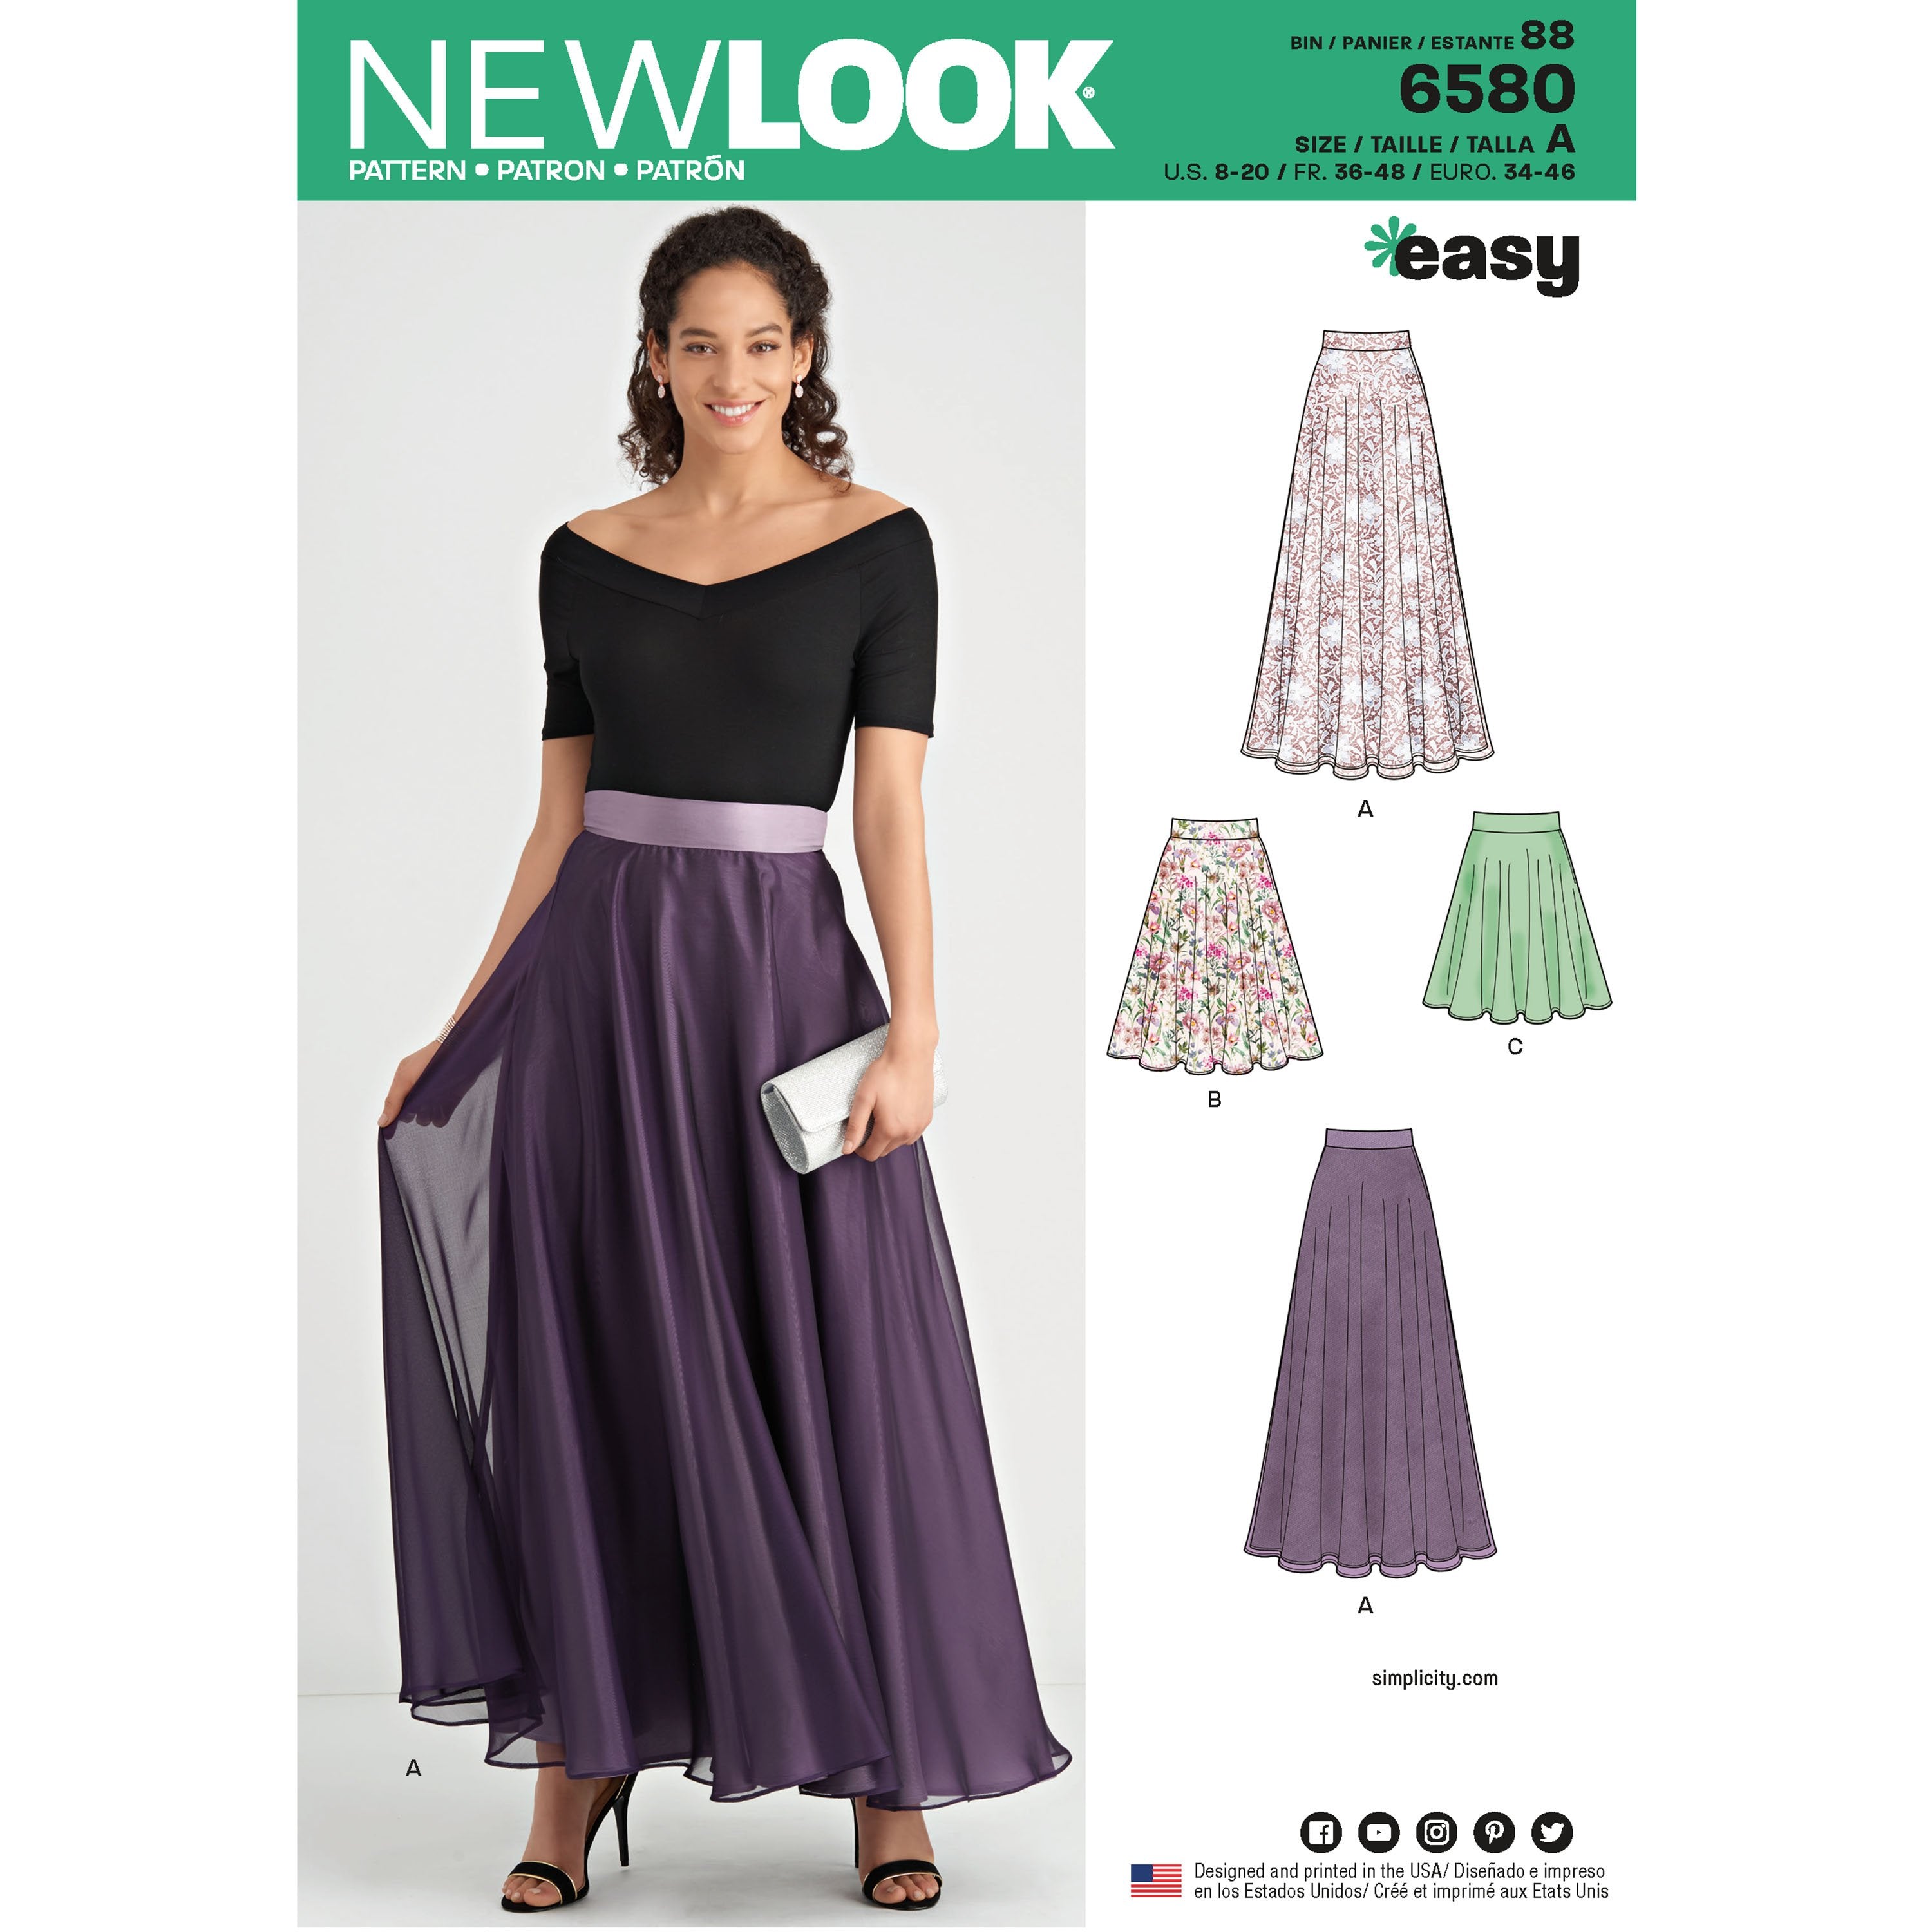 NL6580 Circle Skirt Evening Wear pattern from Jaycotts Sewing Supplies